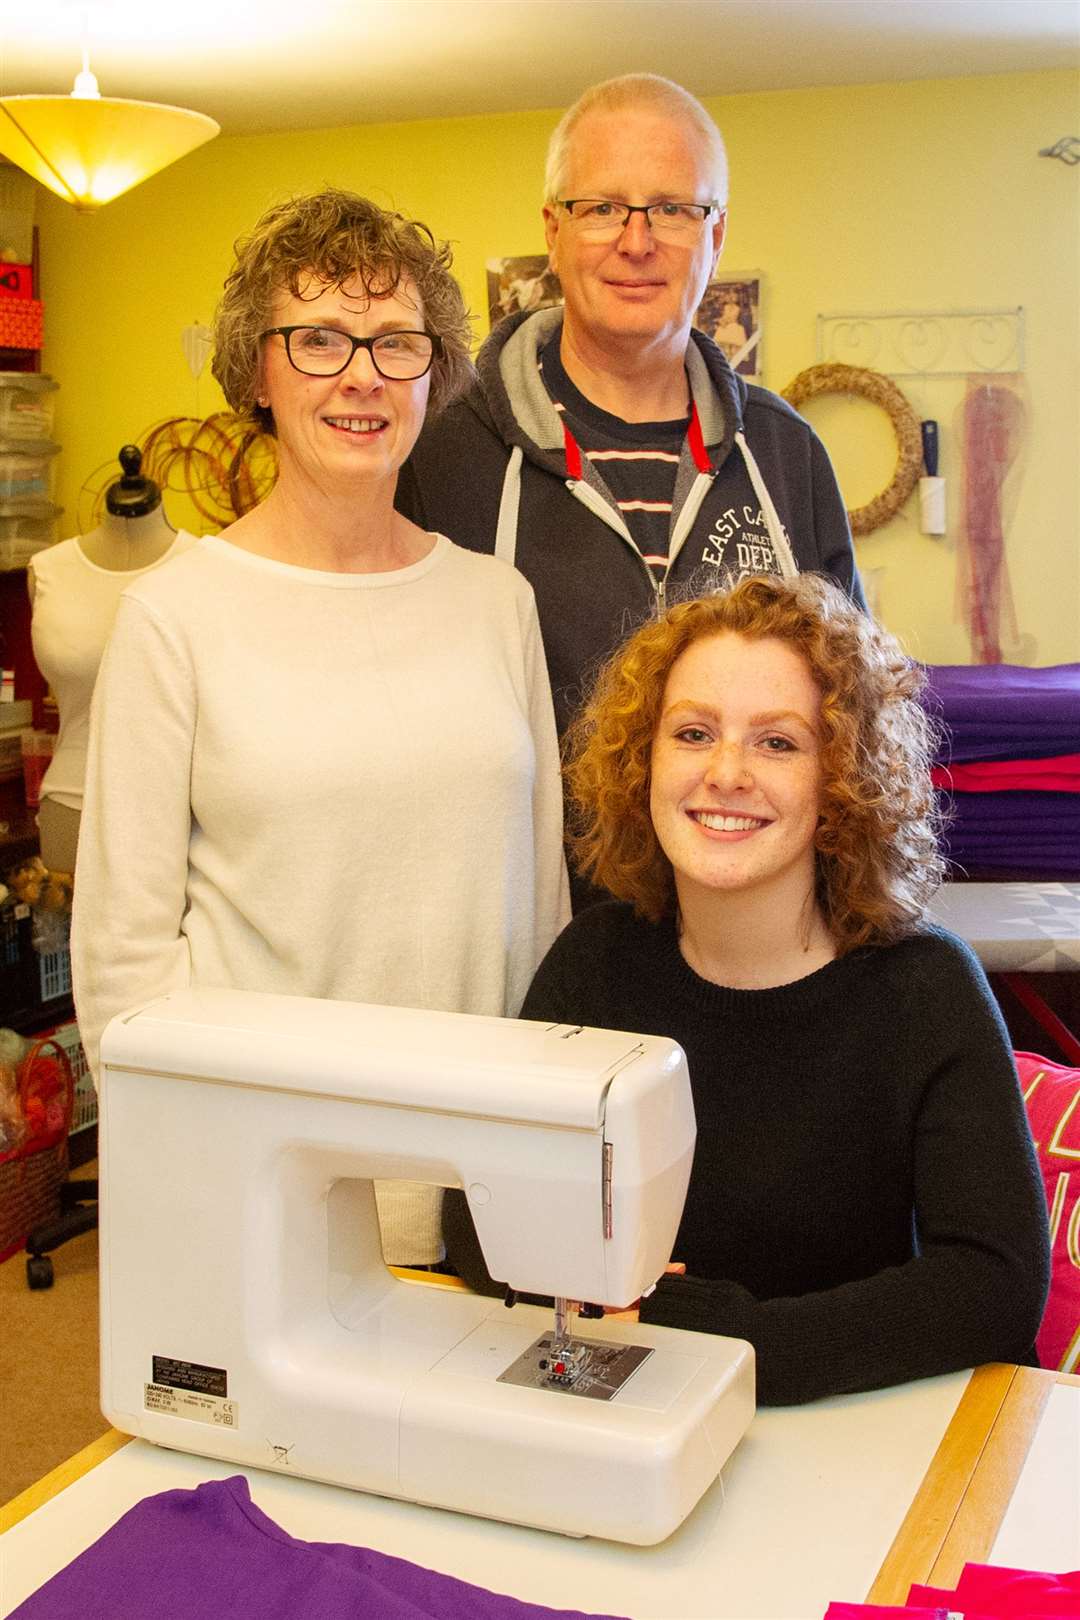 Having returned home to Forres after studying in Glasgow due to the pandemic, 20-year-old Emily Barker has been busy making scrubs for local health care workers while studying from home...Picture: Daniel Forsyth..